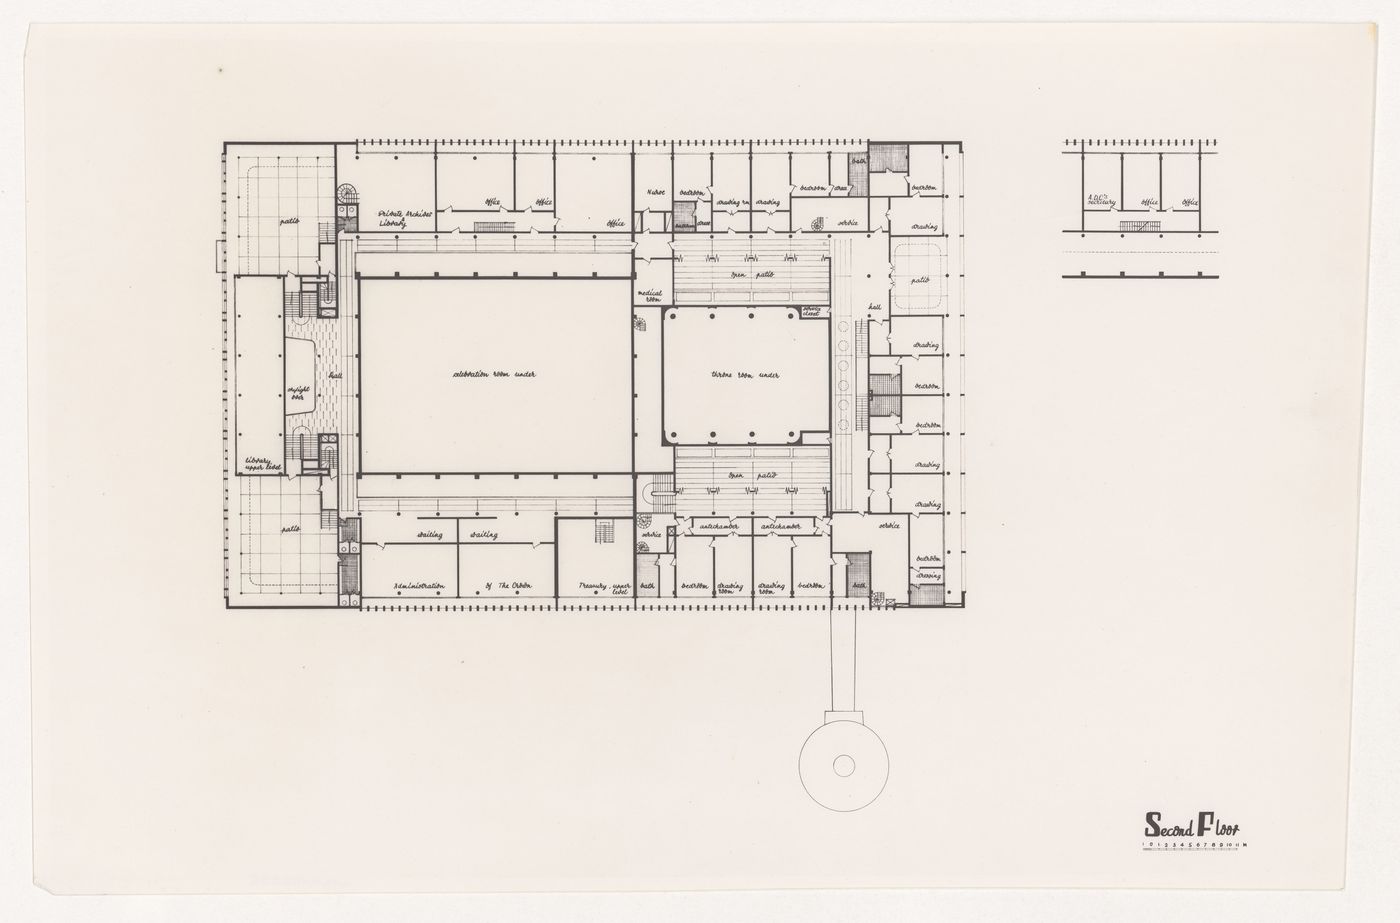 Second floor plan for Government House, Addis Ababa, Ethiopia